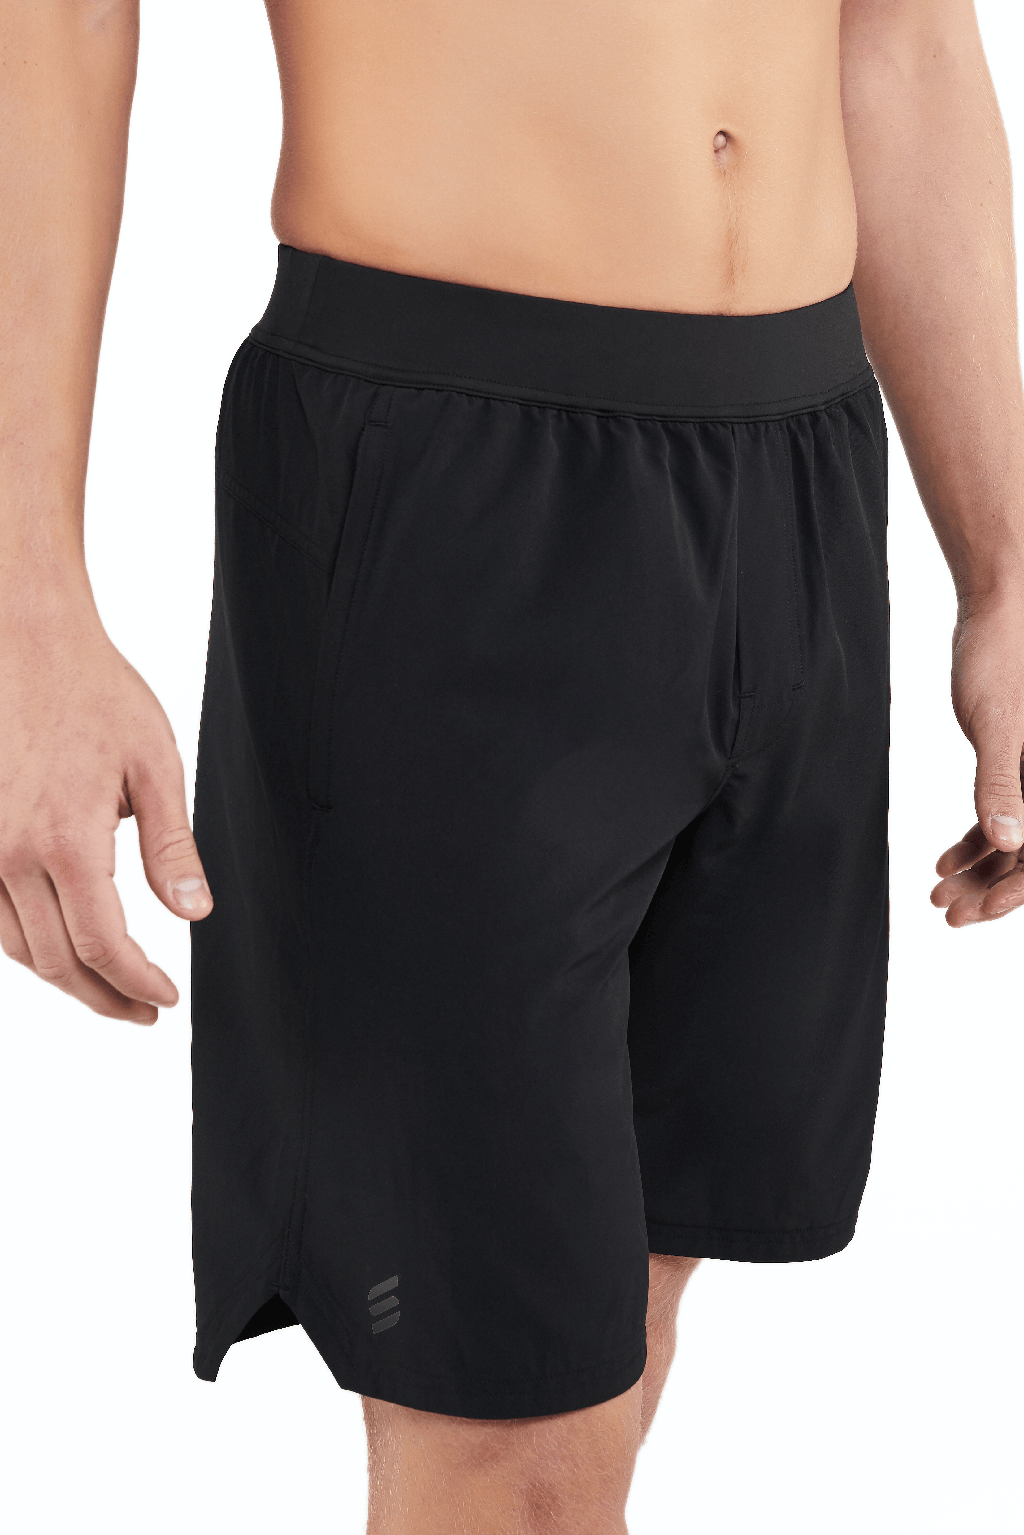 Mens Flow Shorts Zoomed View